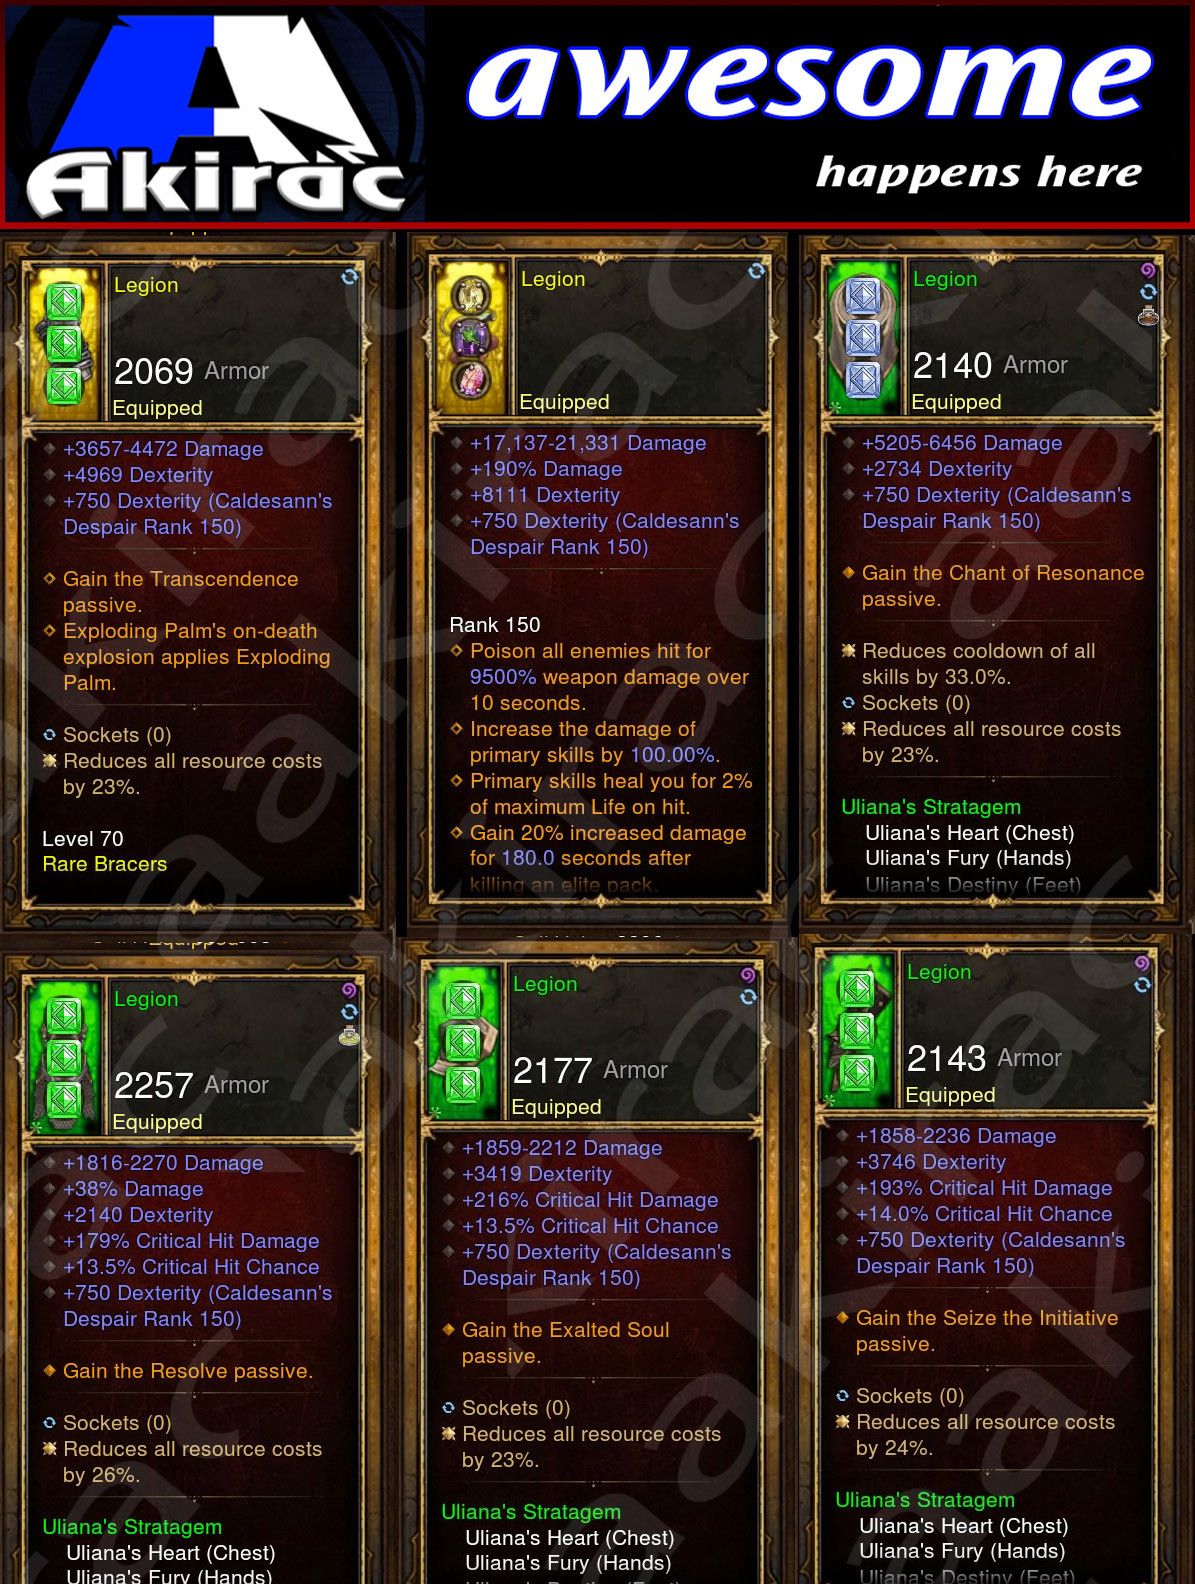 Diablo 3 Immortal v1 Ulania Monk Modded Set for Rift 150 Legion Diablo 3 Mods ROS Seasonal and Non Seasonal Save Mod - Modded Items and Gear - Hacks - Cheats - Trainers for Playstation 4 - Playstation 5 - Nintendo Switch - Xbox One